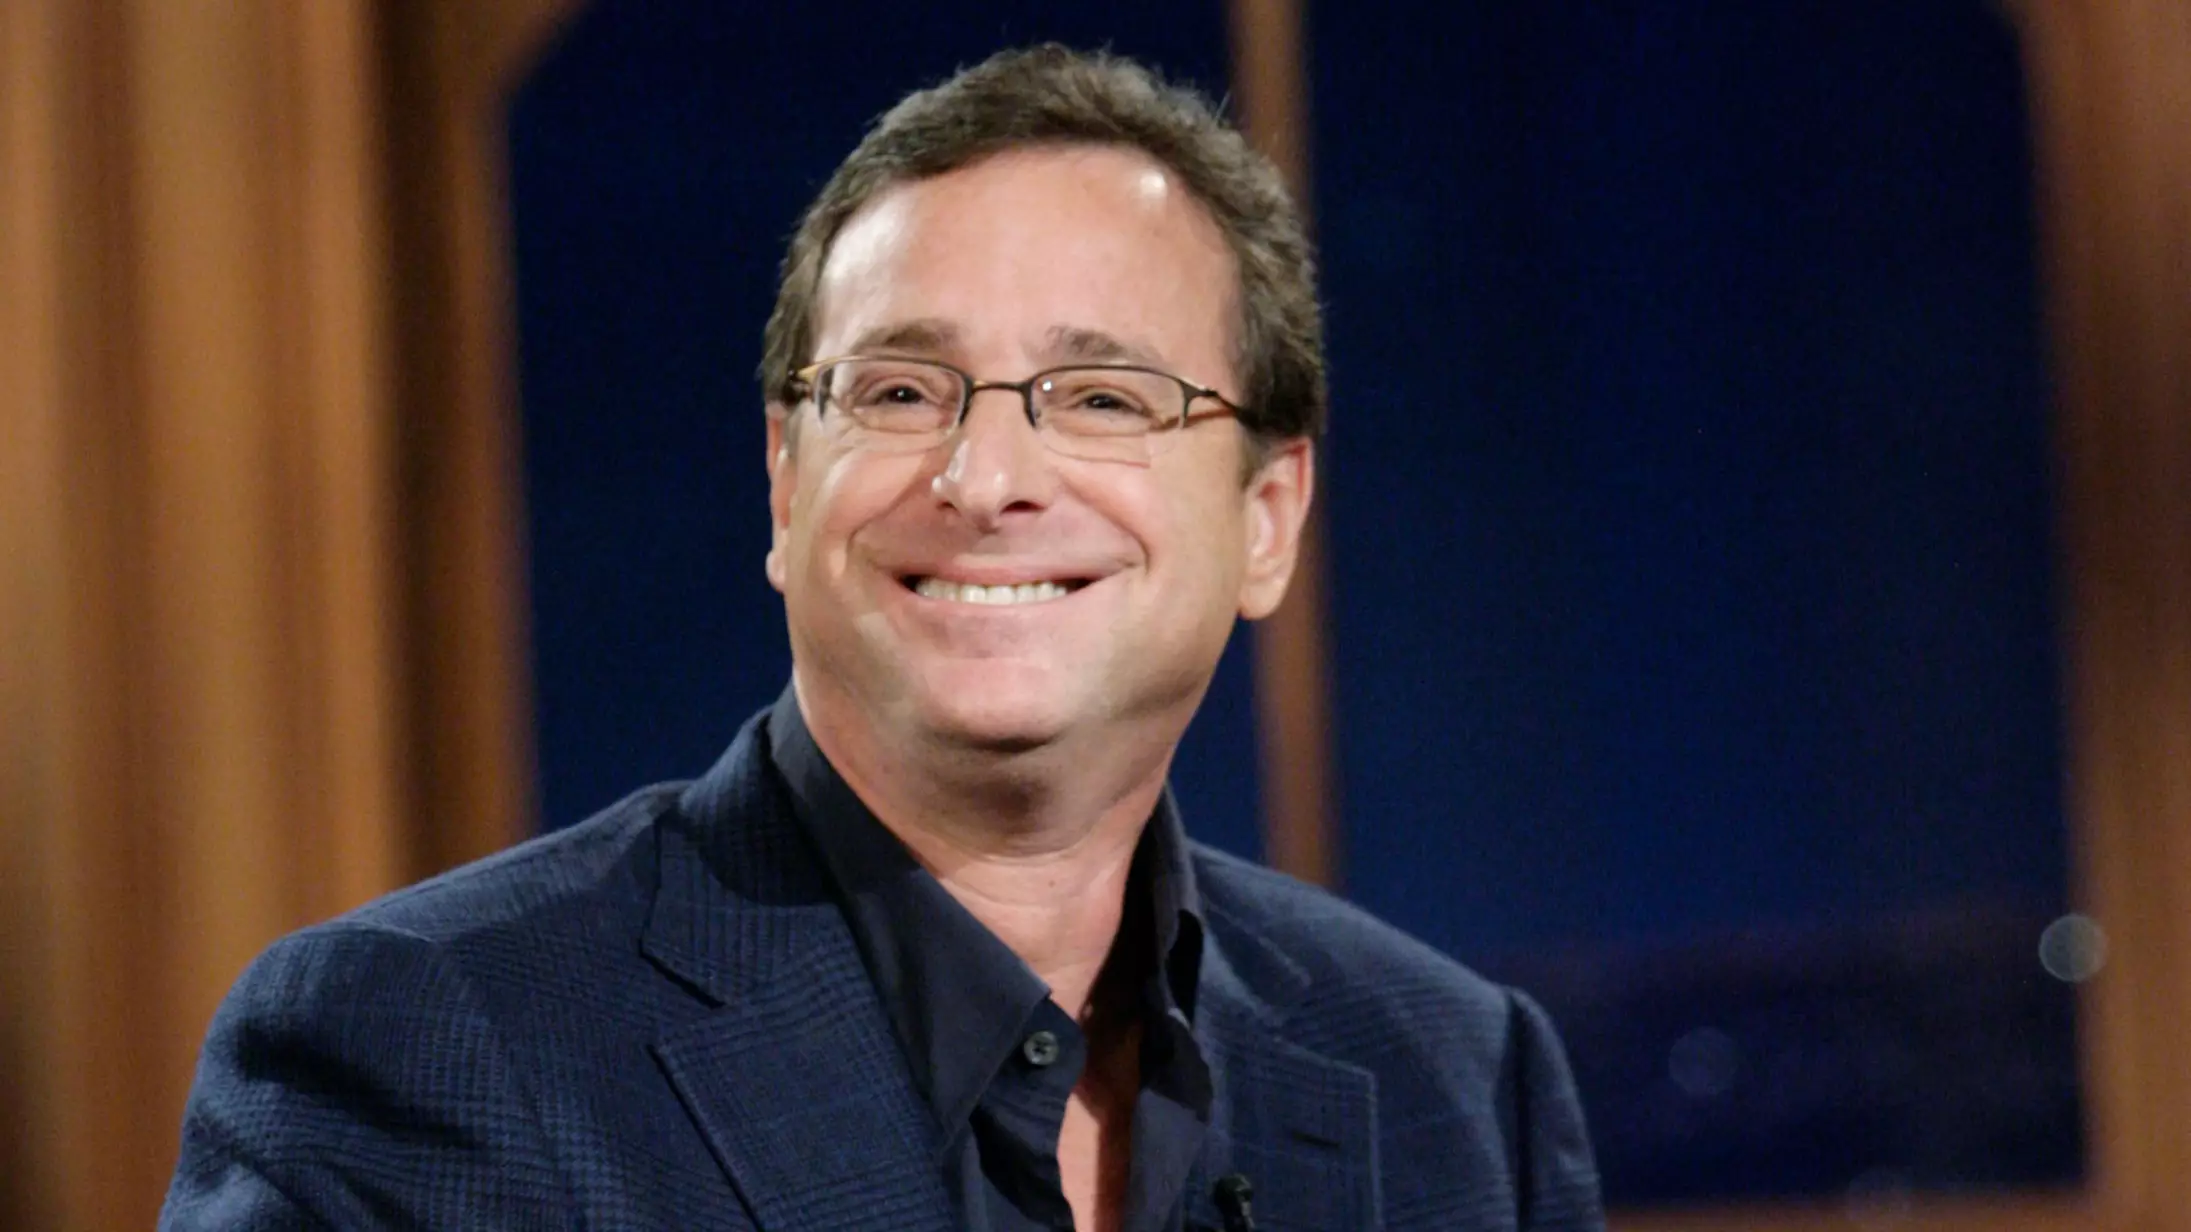 Bob Saget’s Family Reveals He Died From Head Trauma